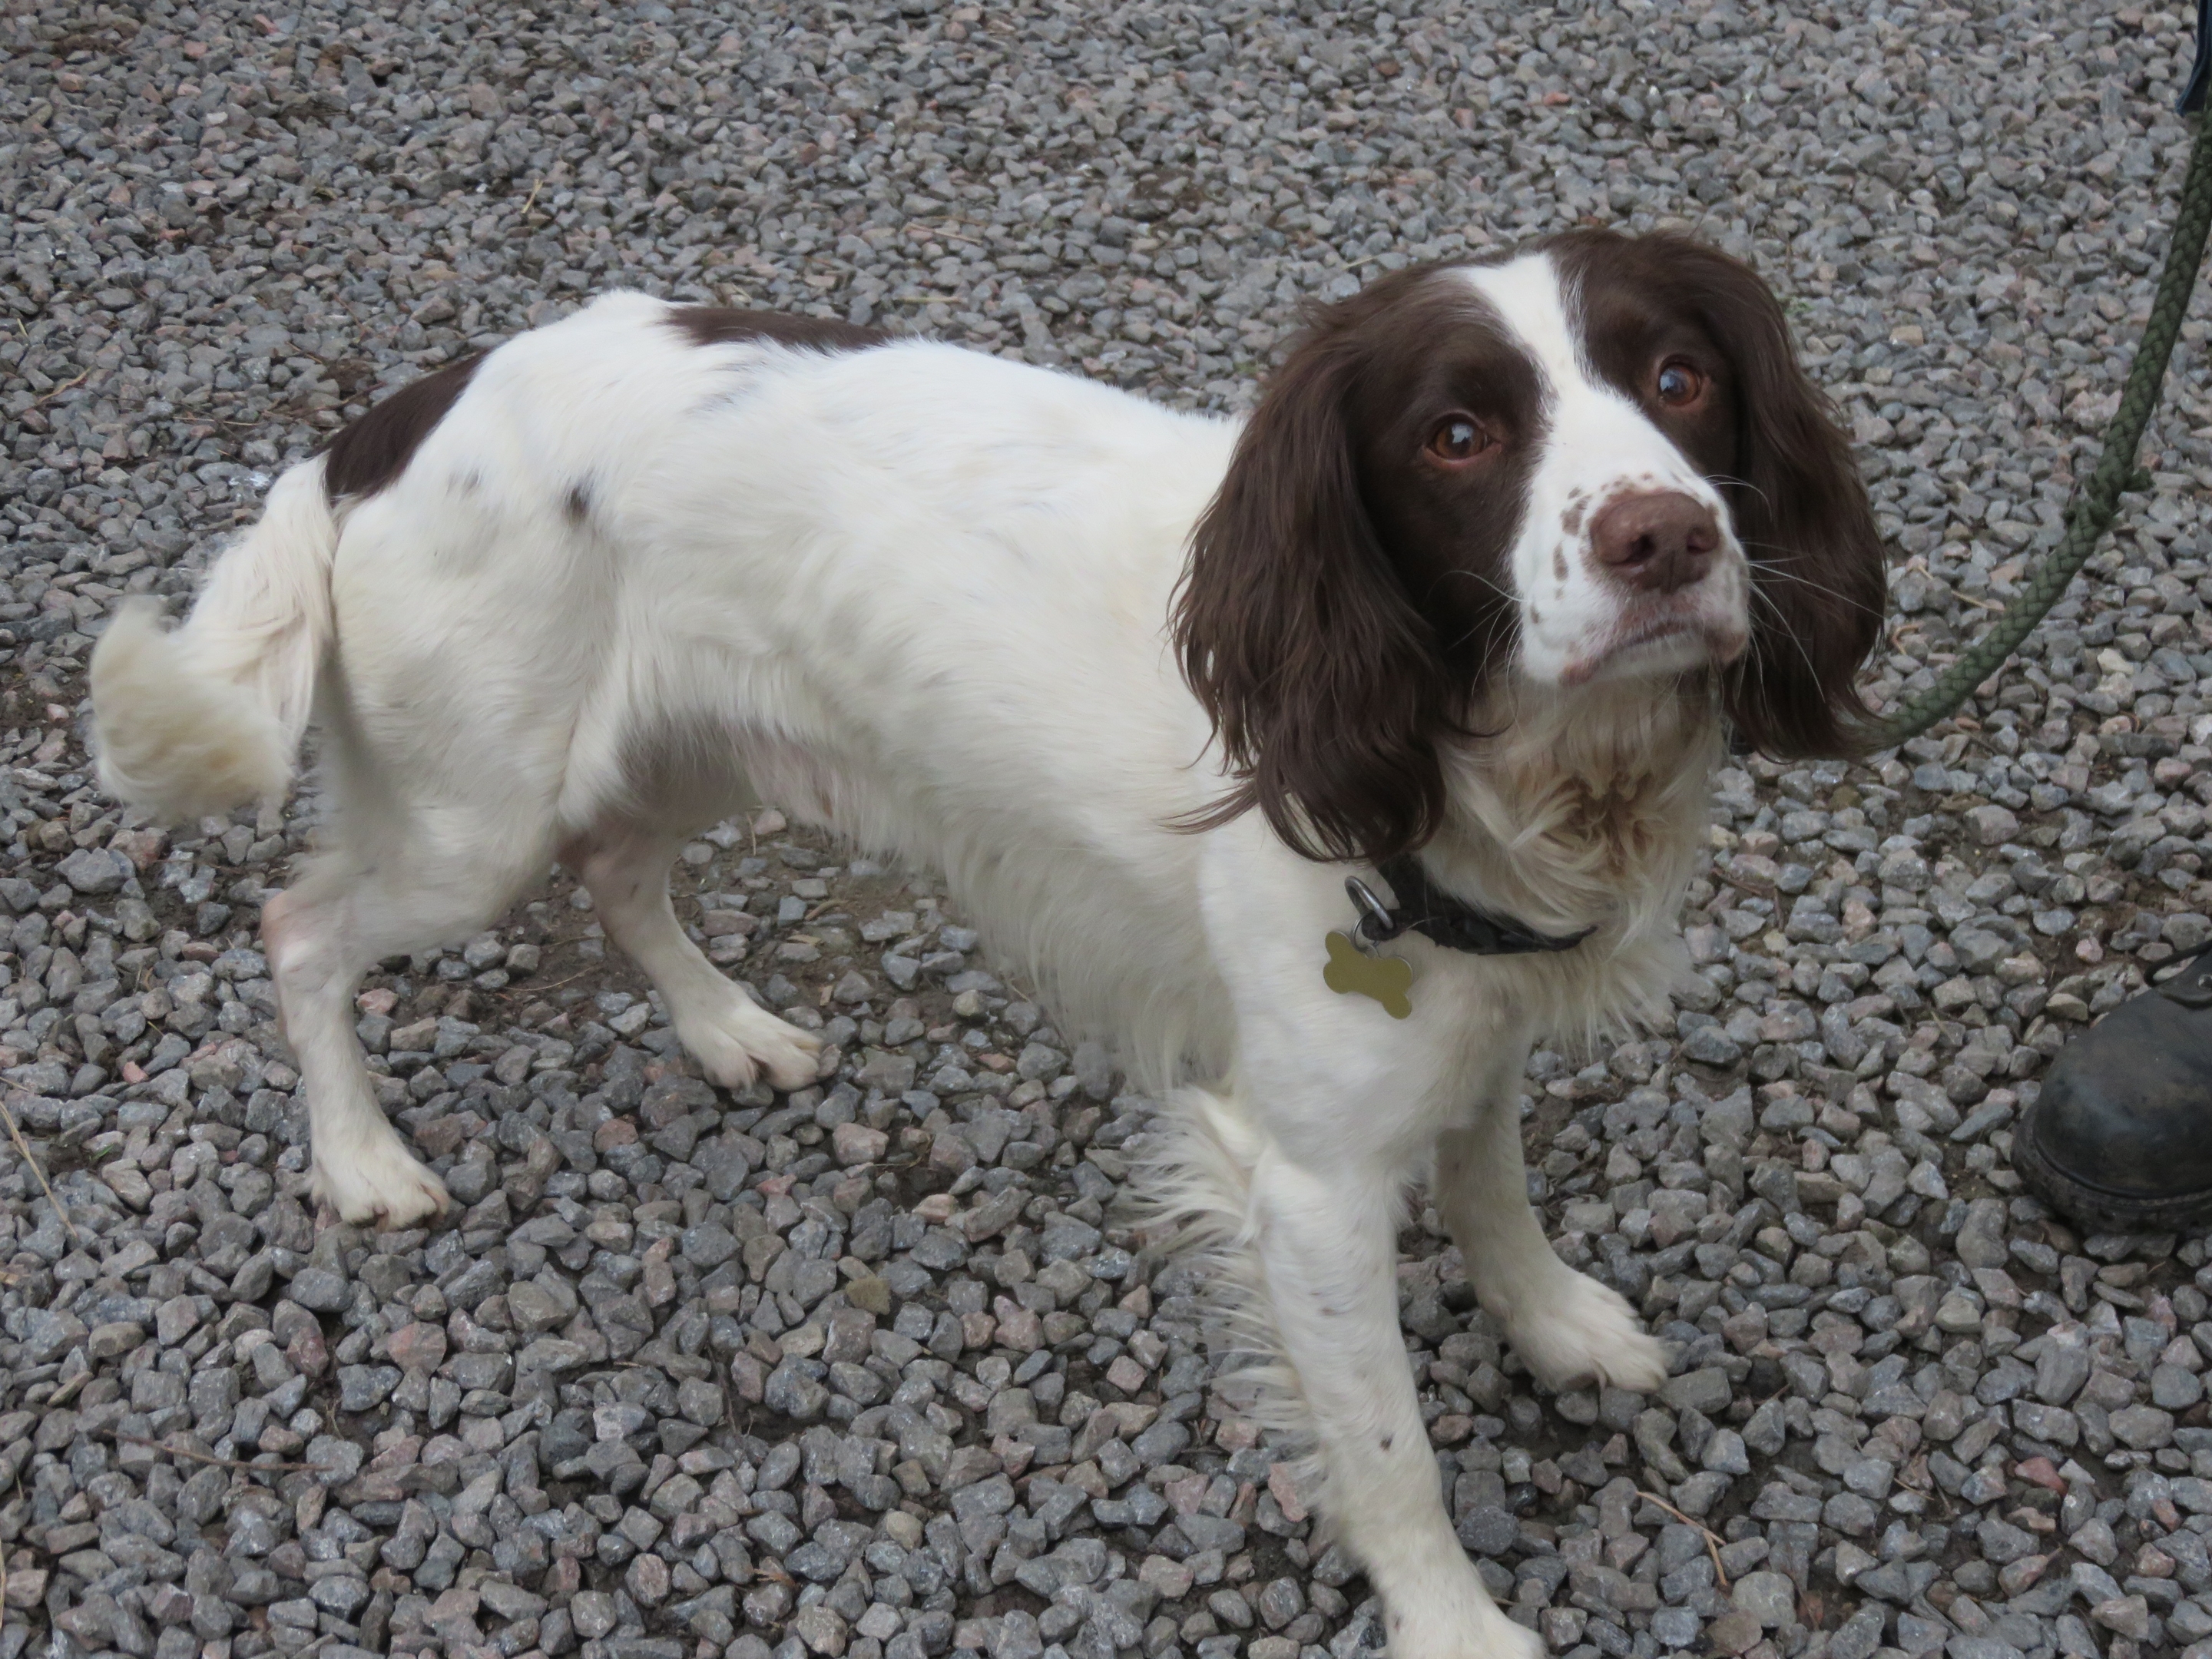 Max the spaniel believed to have attacked the sheep